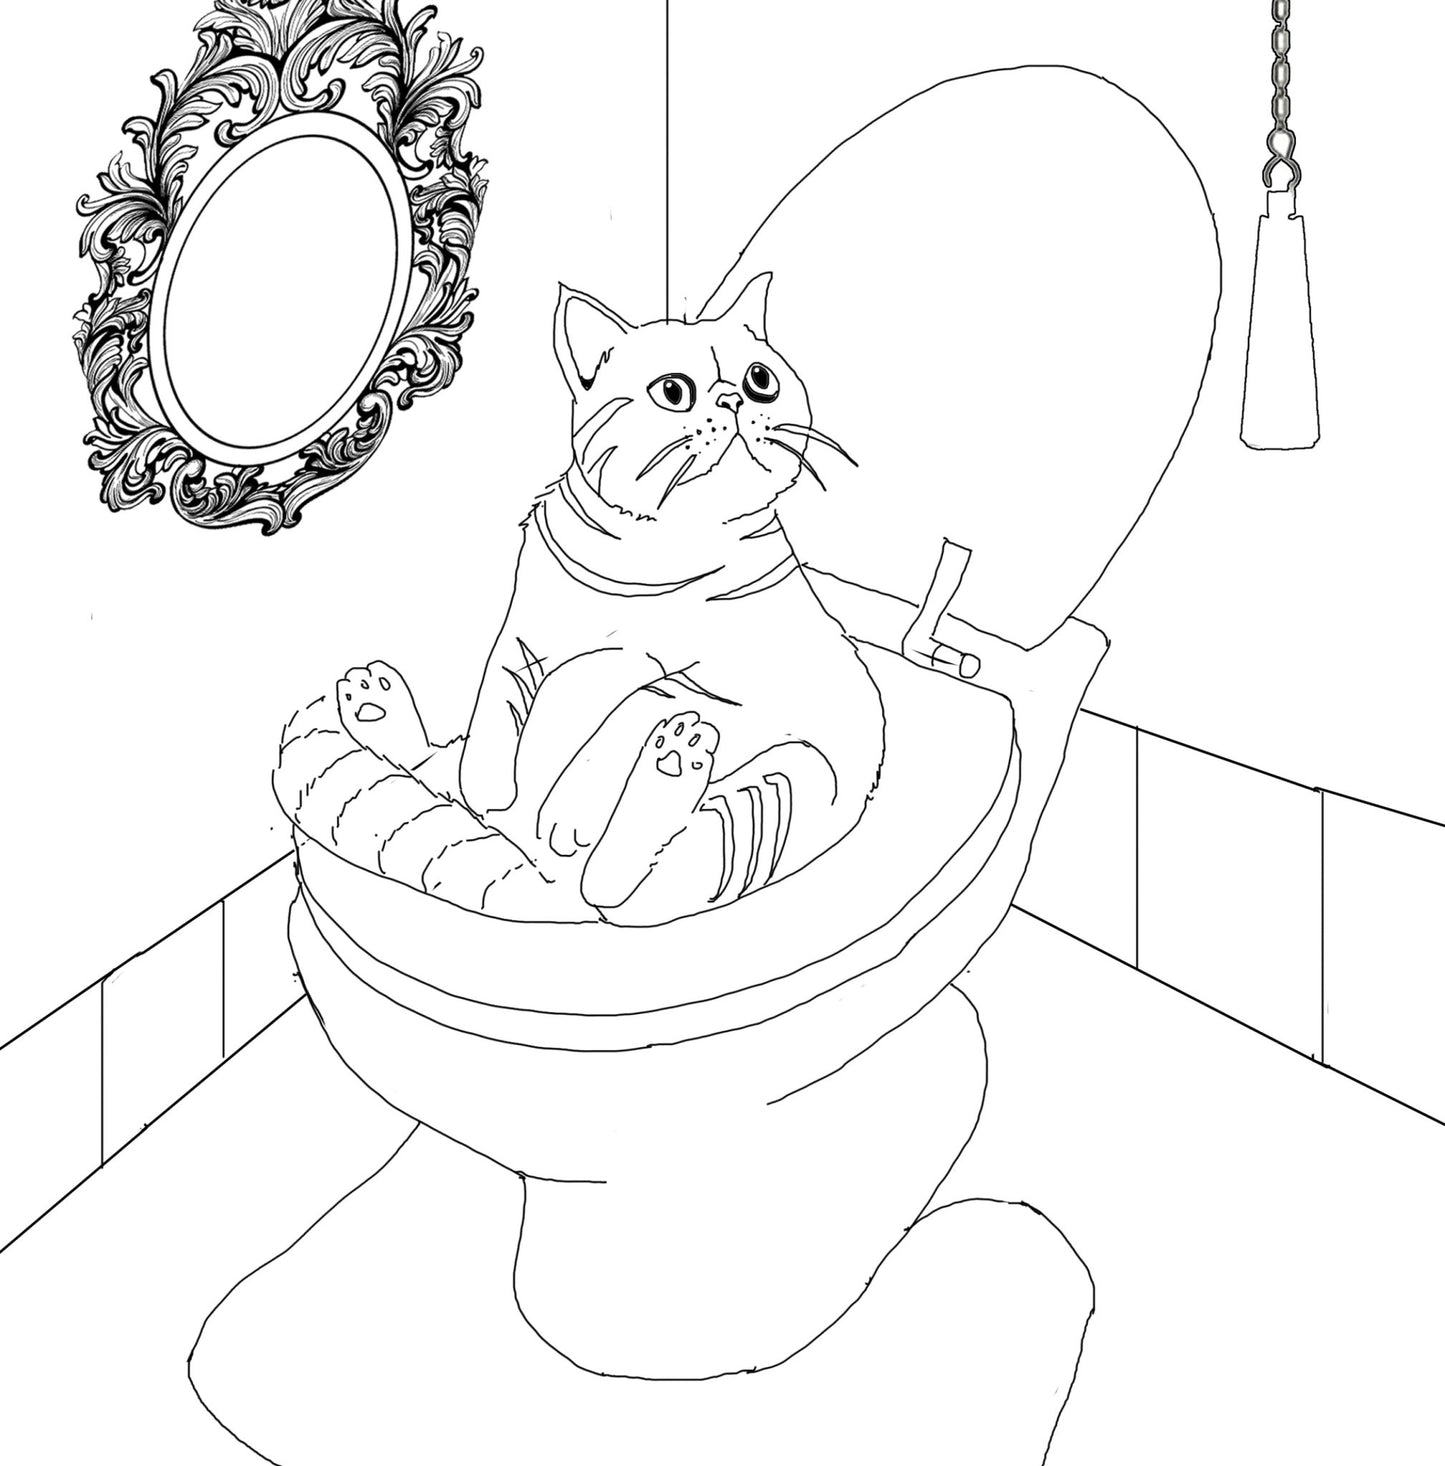 Crazy Cats Coloring Book for Adults (Digital) - Monsoon Publishing USA